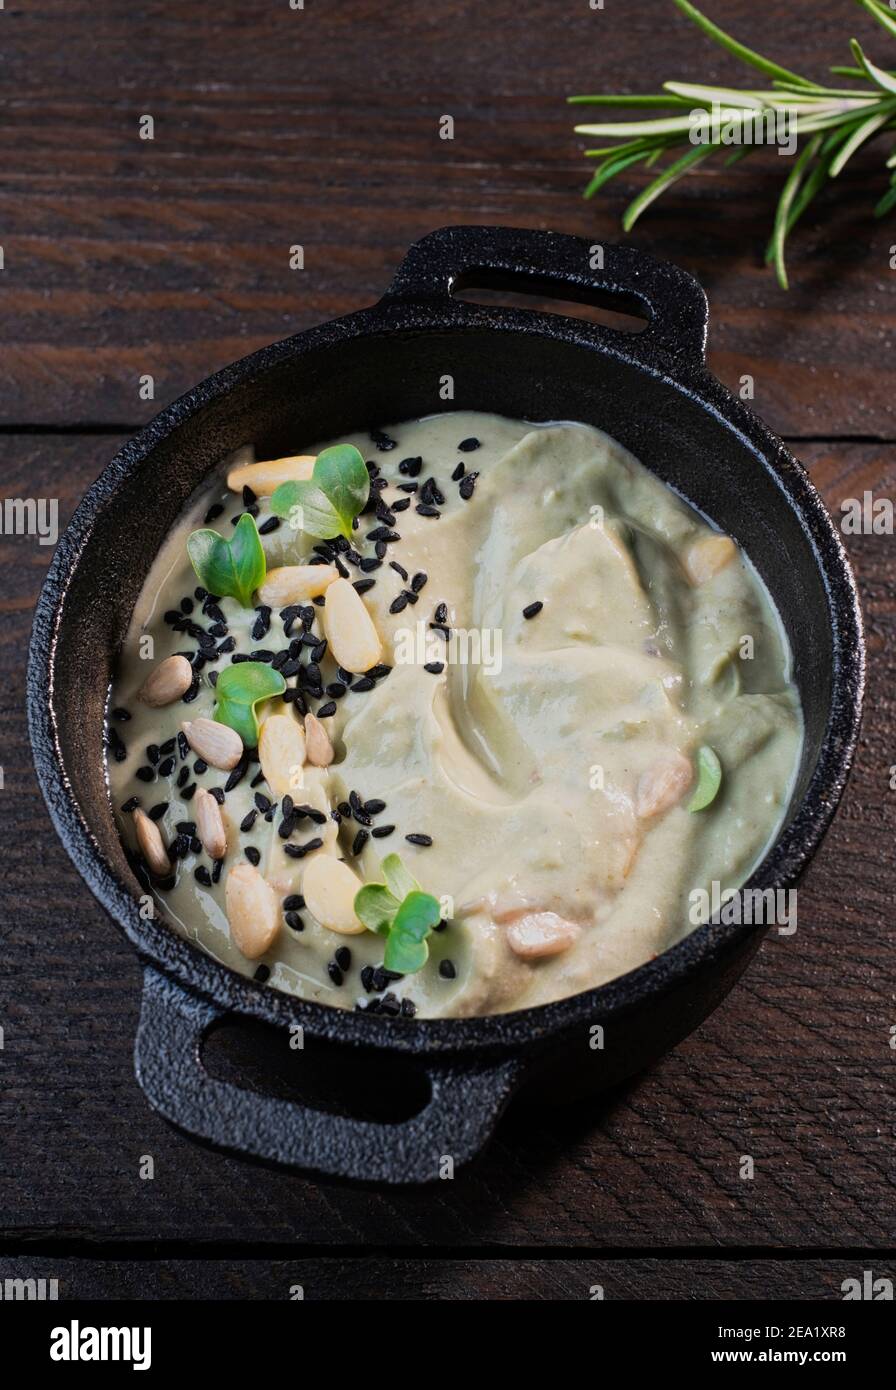 Avocado dip arranged in a black cast iron top, decorated with rosemary Stock Photo